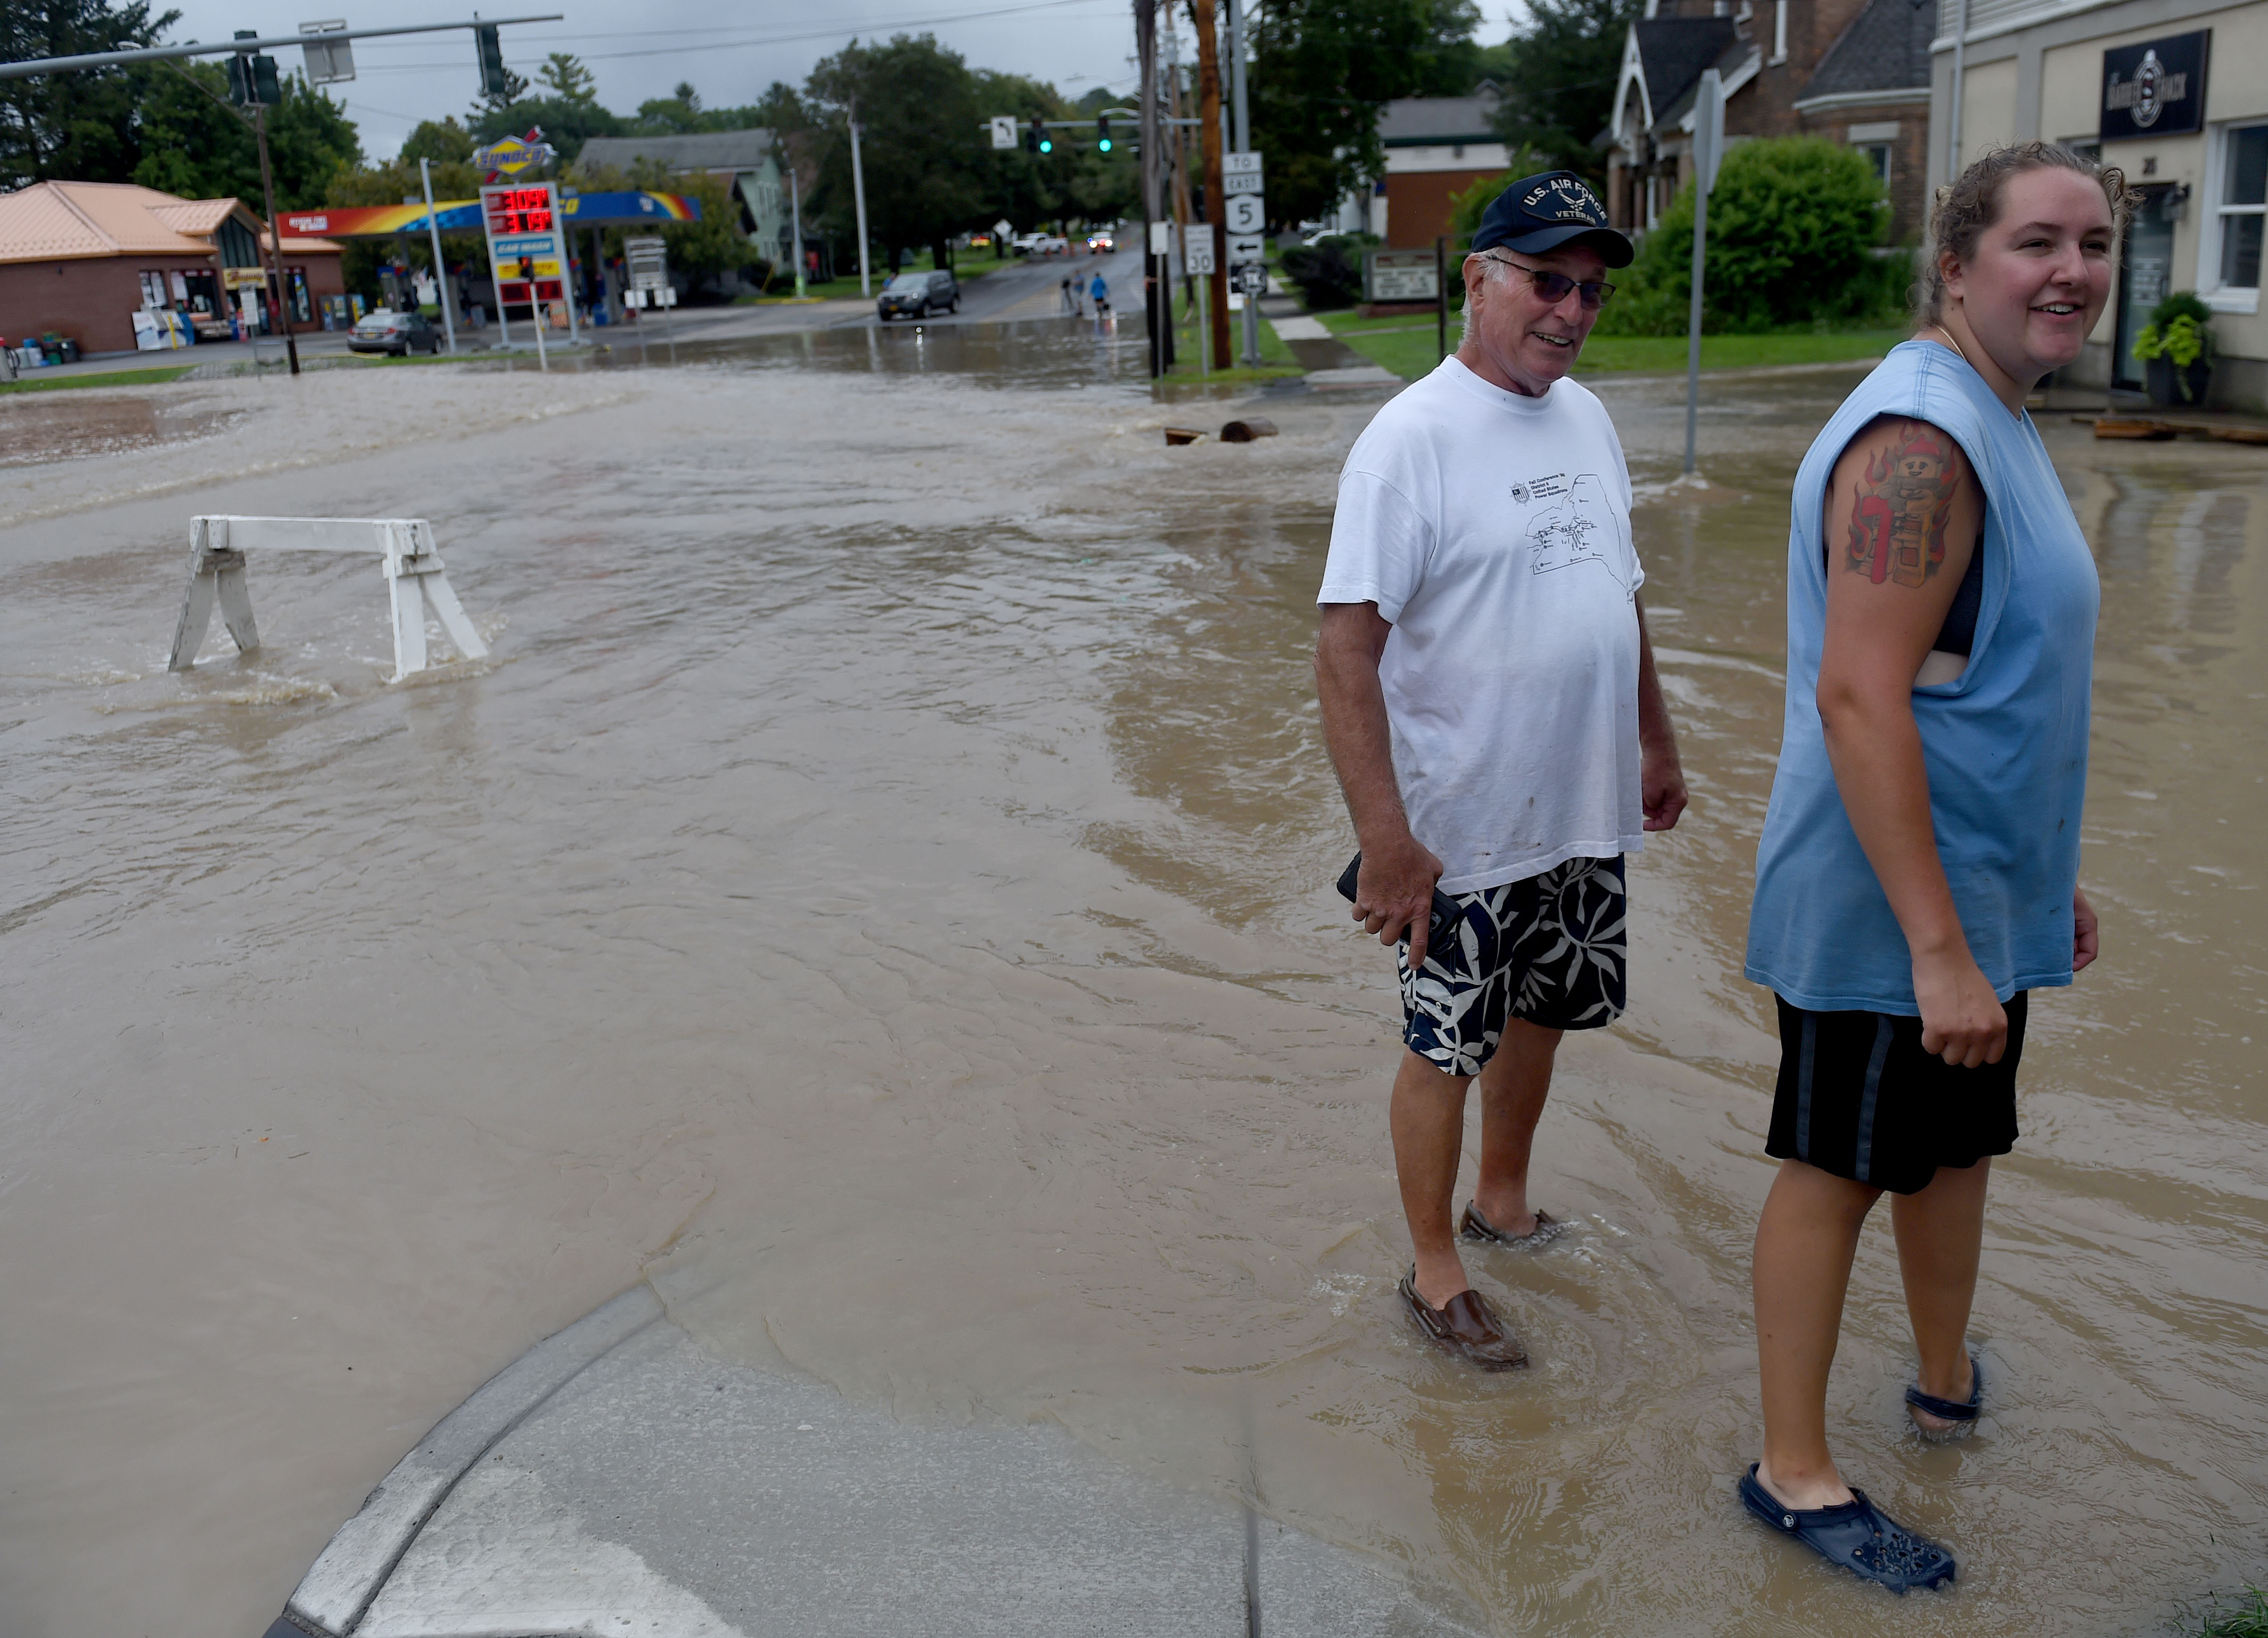 Jim Goodwin and Ashley Rether, residents on South Street in Camillus, survey the flooding of Ninemile Creek August 19, 2021. Goodwin says he hasn't seen anything like this in the village since 1971. Heavy rains again created flooding in Central New York with a lot of flooding occurring along Ninemile Creek in Camillus and Marcellus. Dennis Nett | dnett@syracuse.com